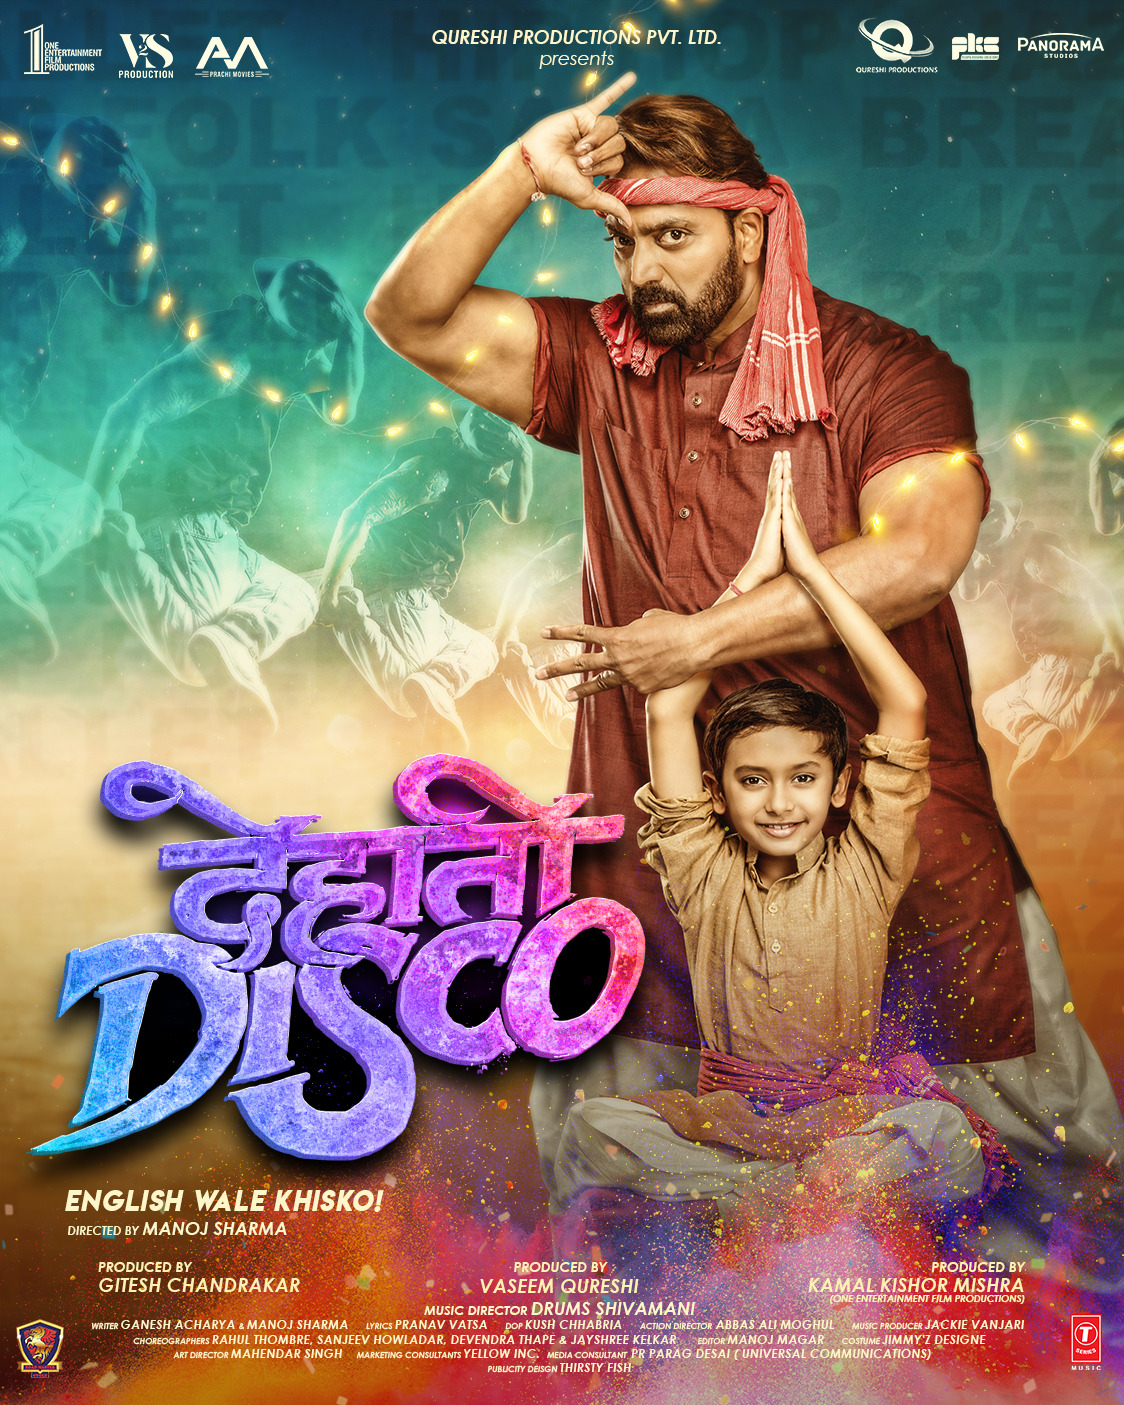 Extra Large Movie Poster Image for Dehati Disco (#2 of 3)